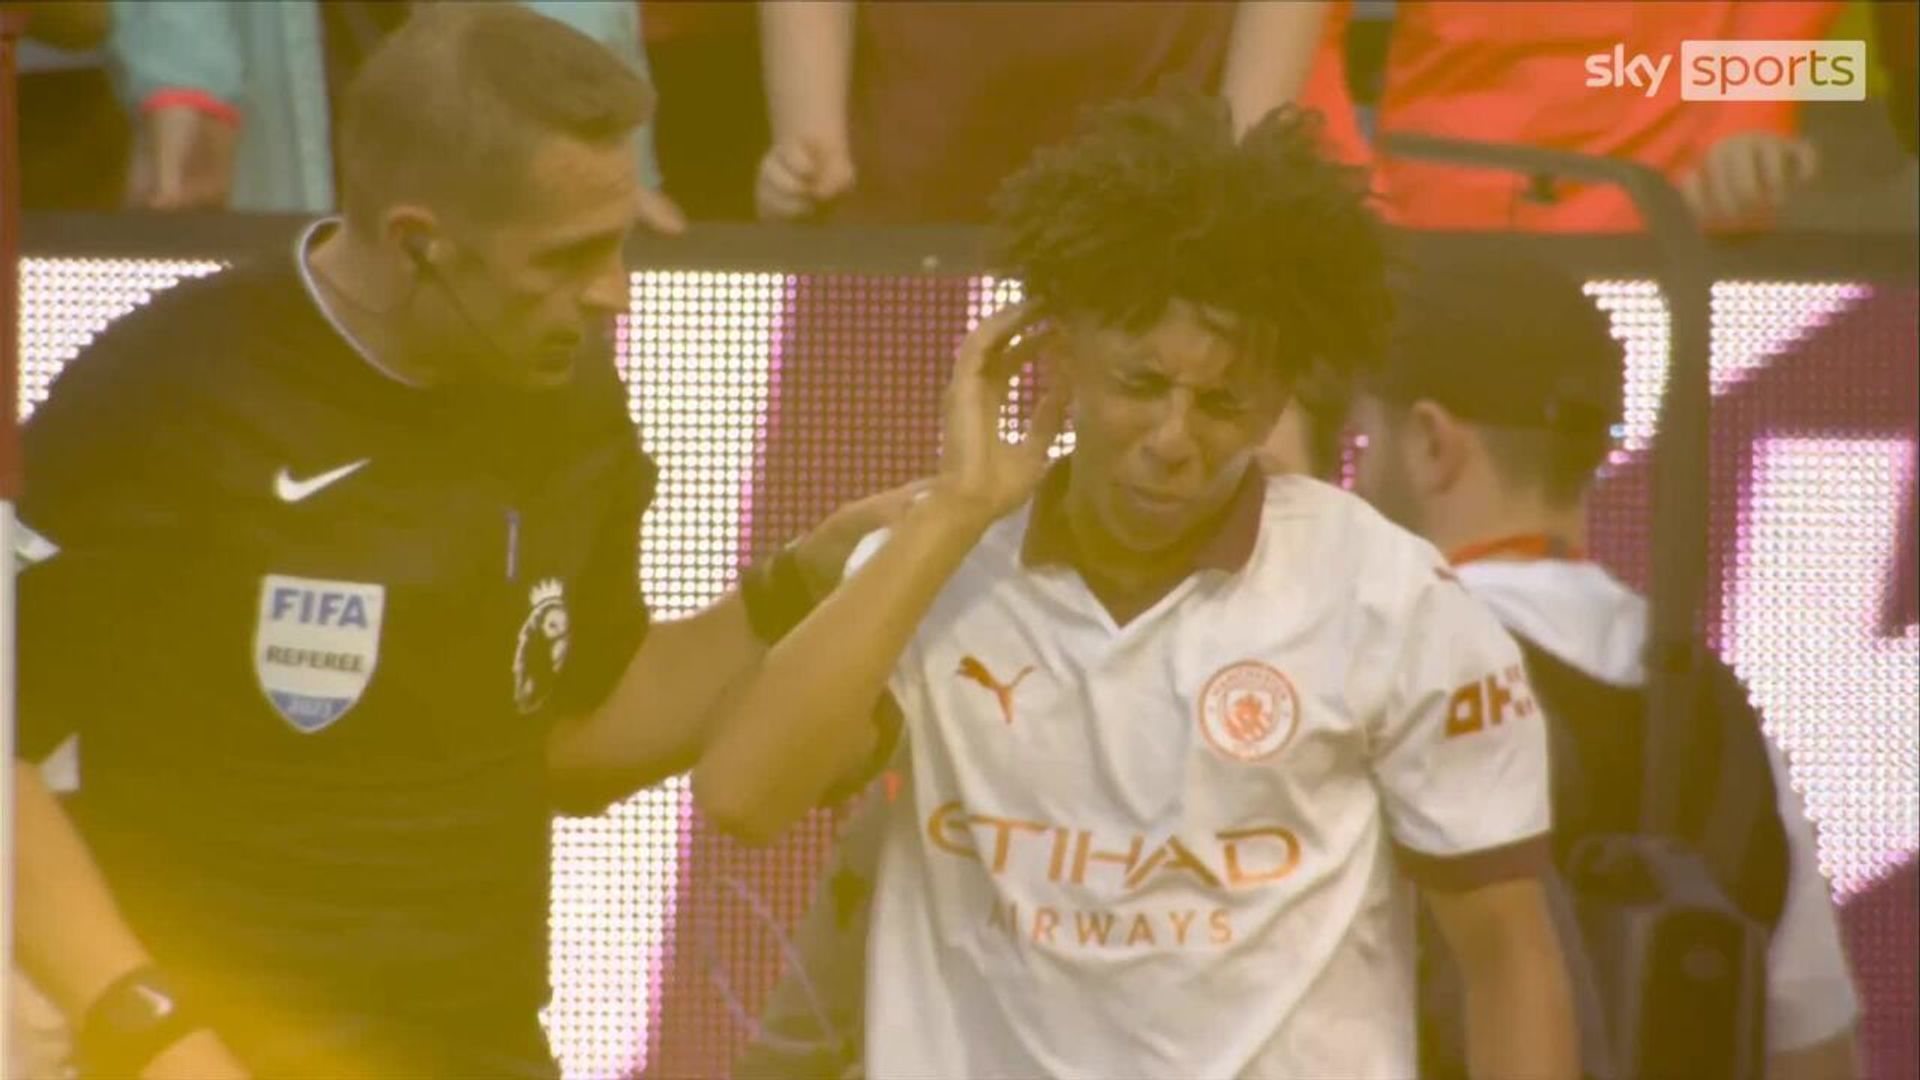 Man City's Lewis appears to be hit by lighter from crowd